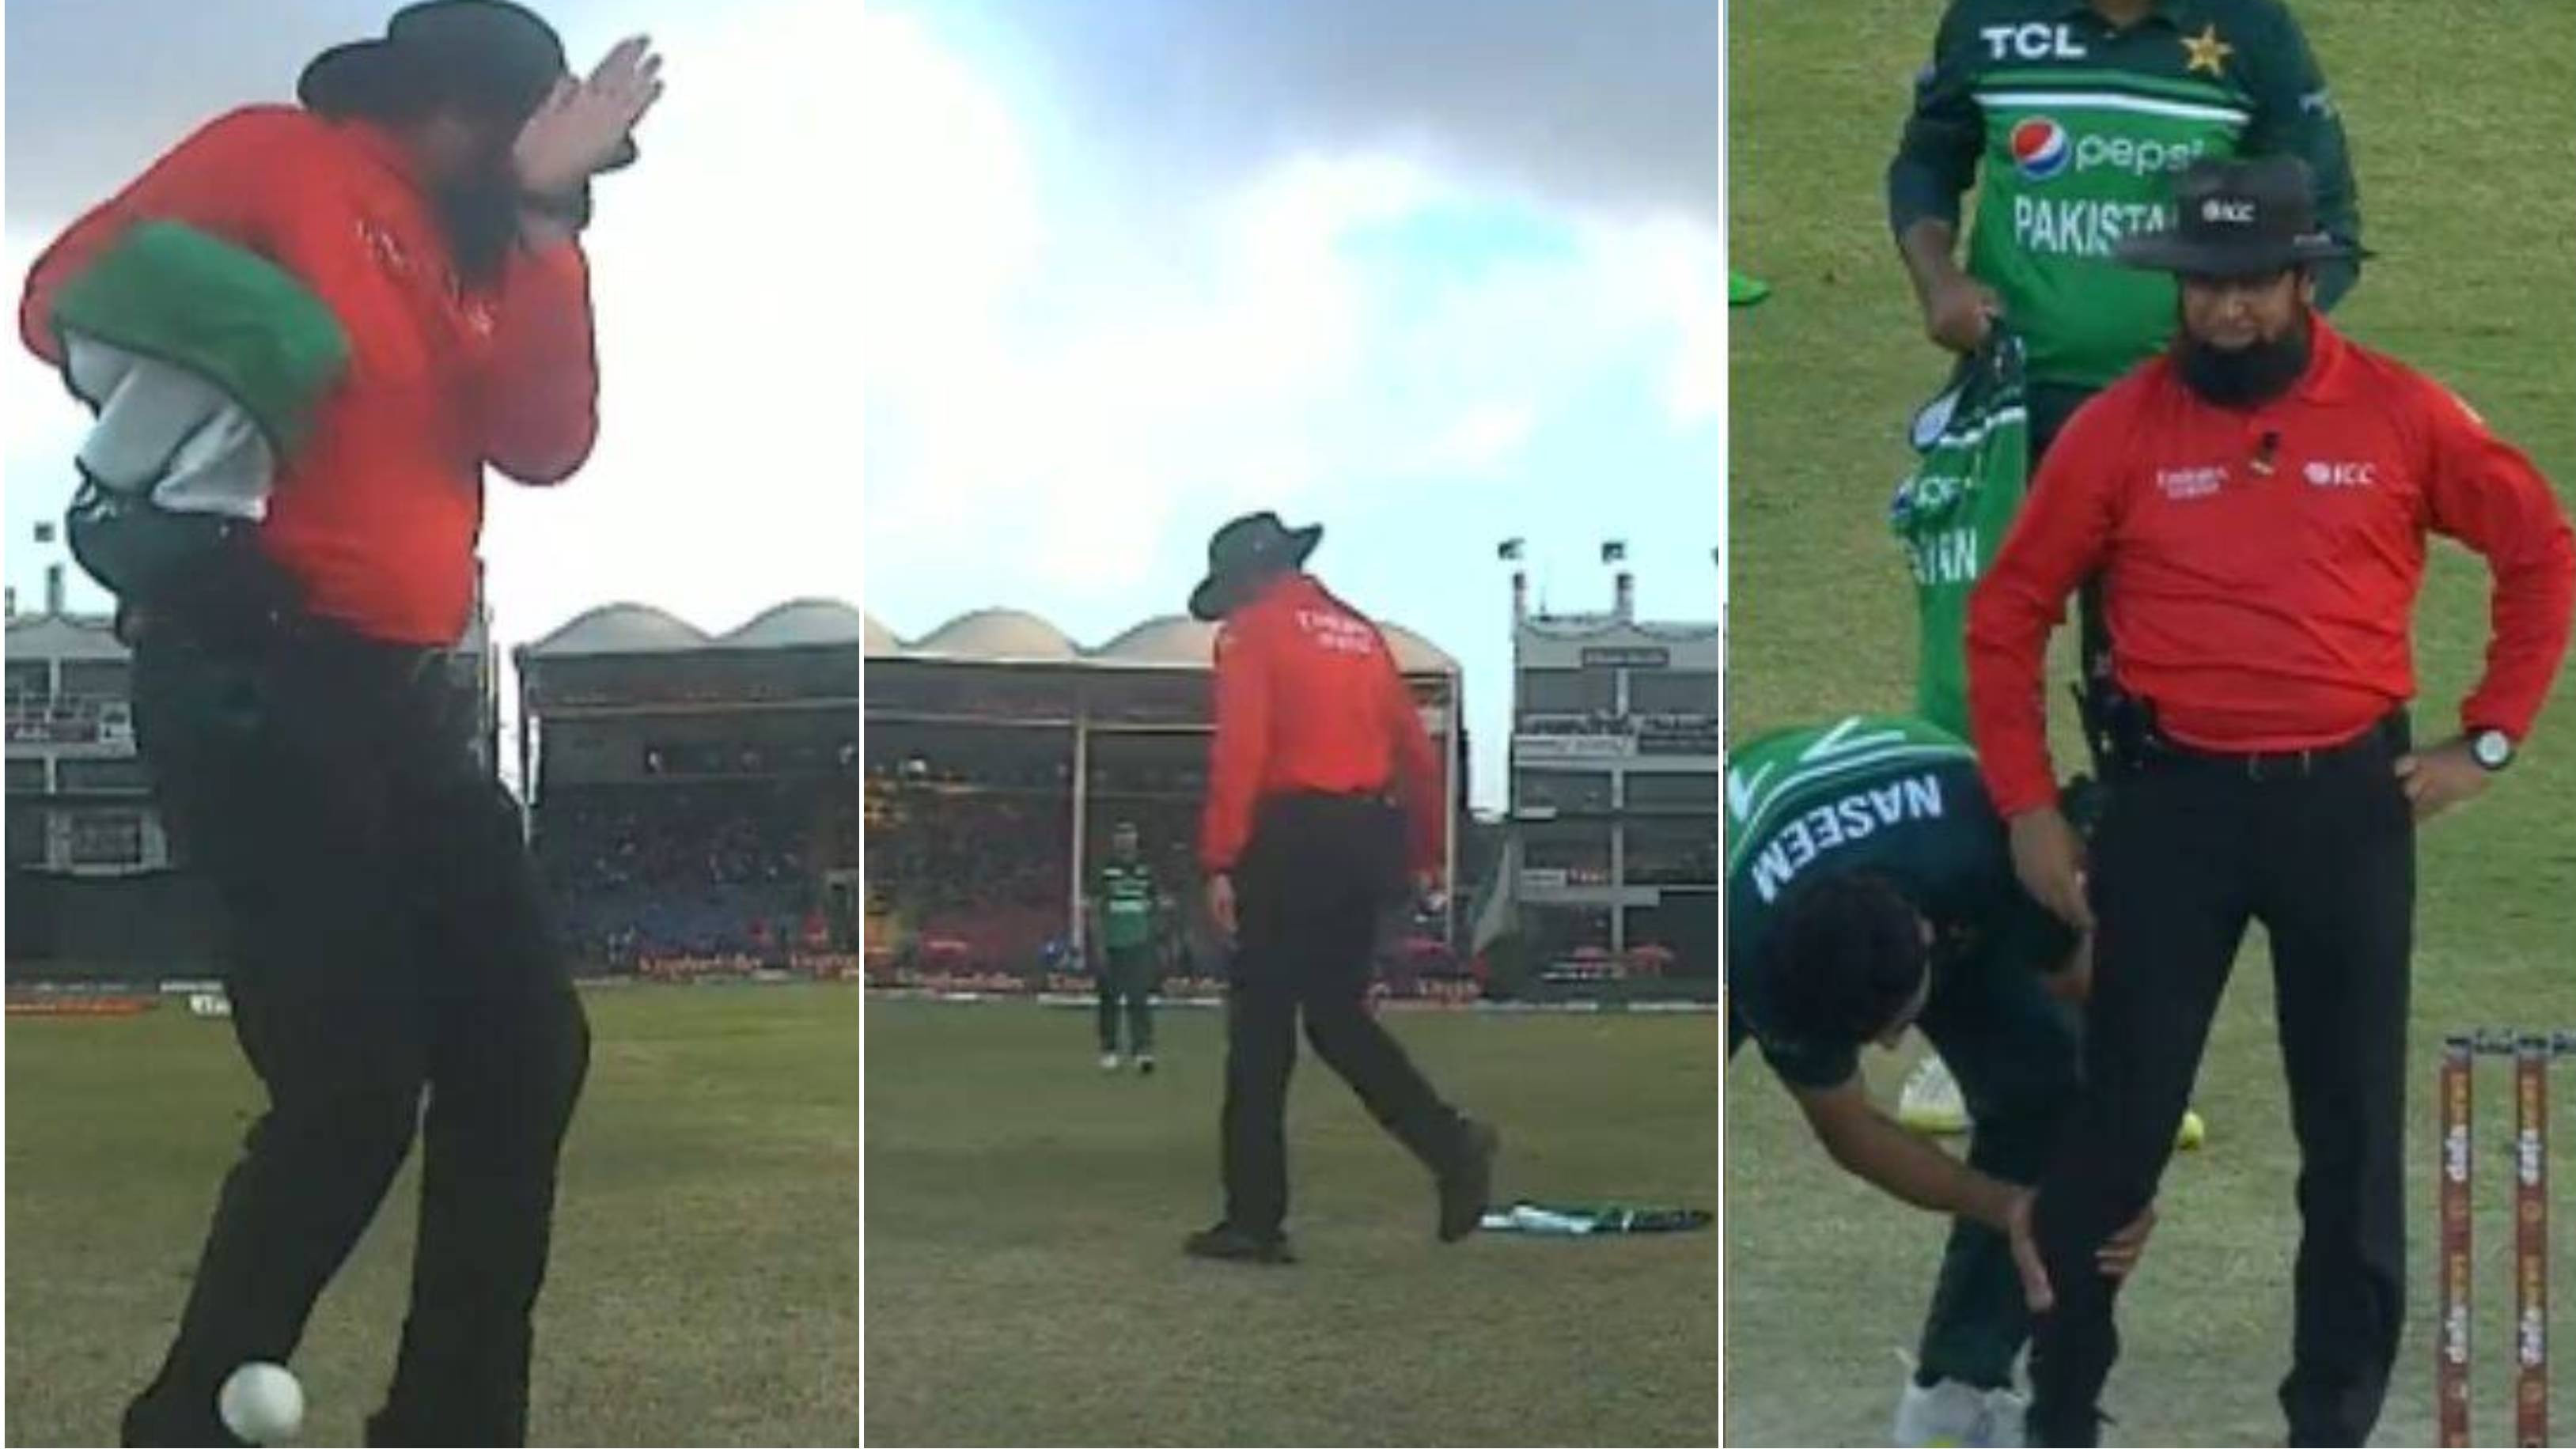 PAK v NZ 2022-23: WATCH - Umpire Aleem Dar suffers a painful blow as Mohammad Wasim Jr’s throw hits him on ankle